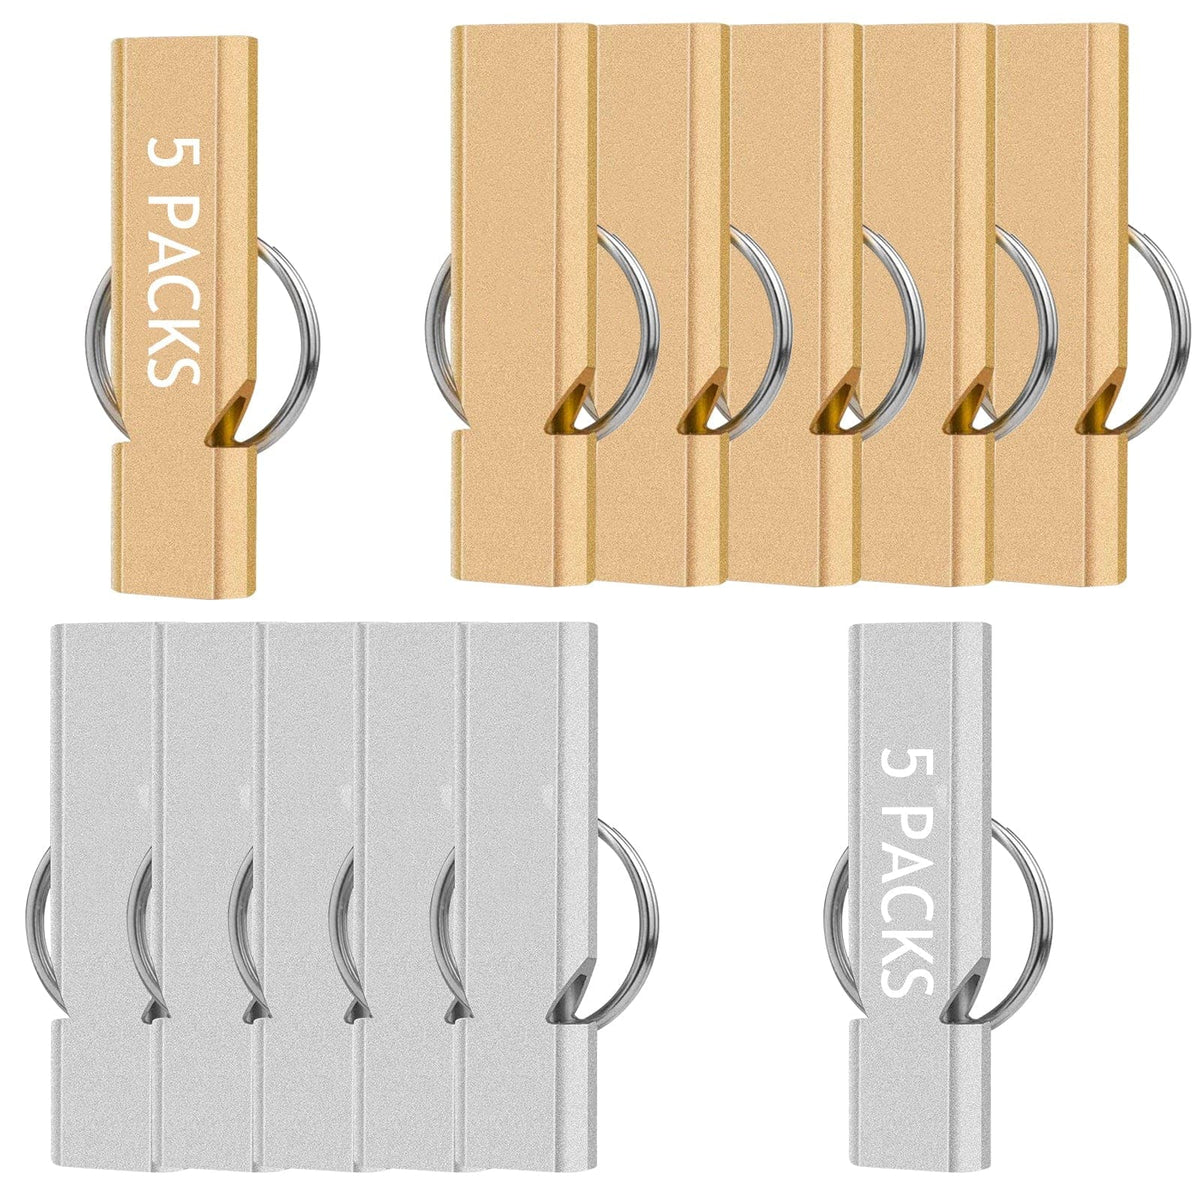 10 Packs Gold and Silver Emergency Whistle